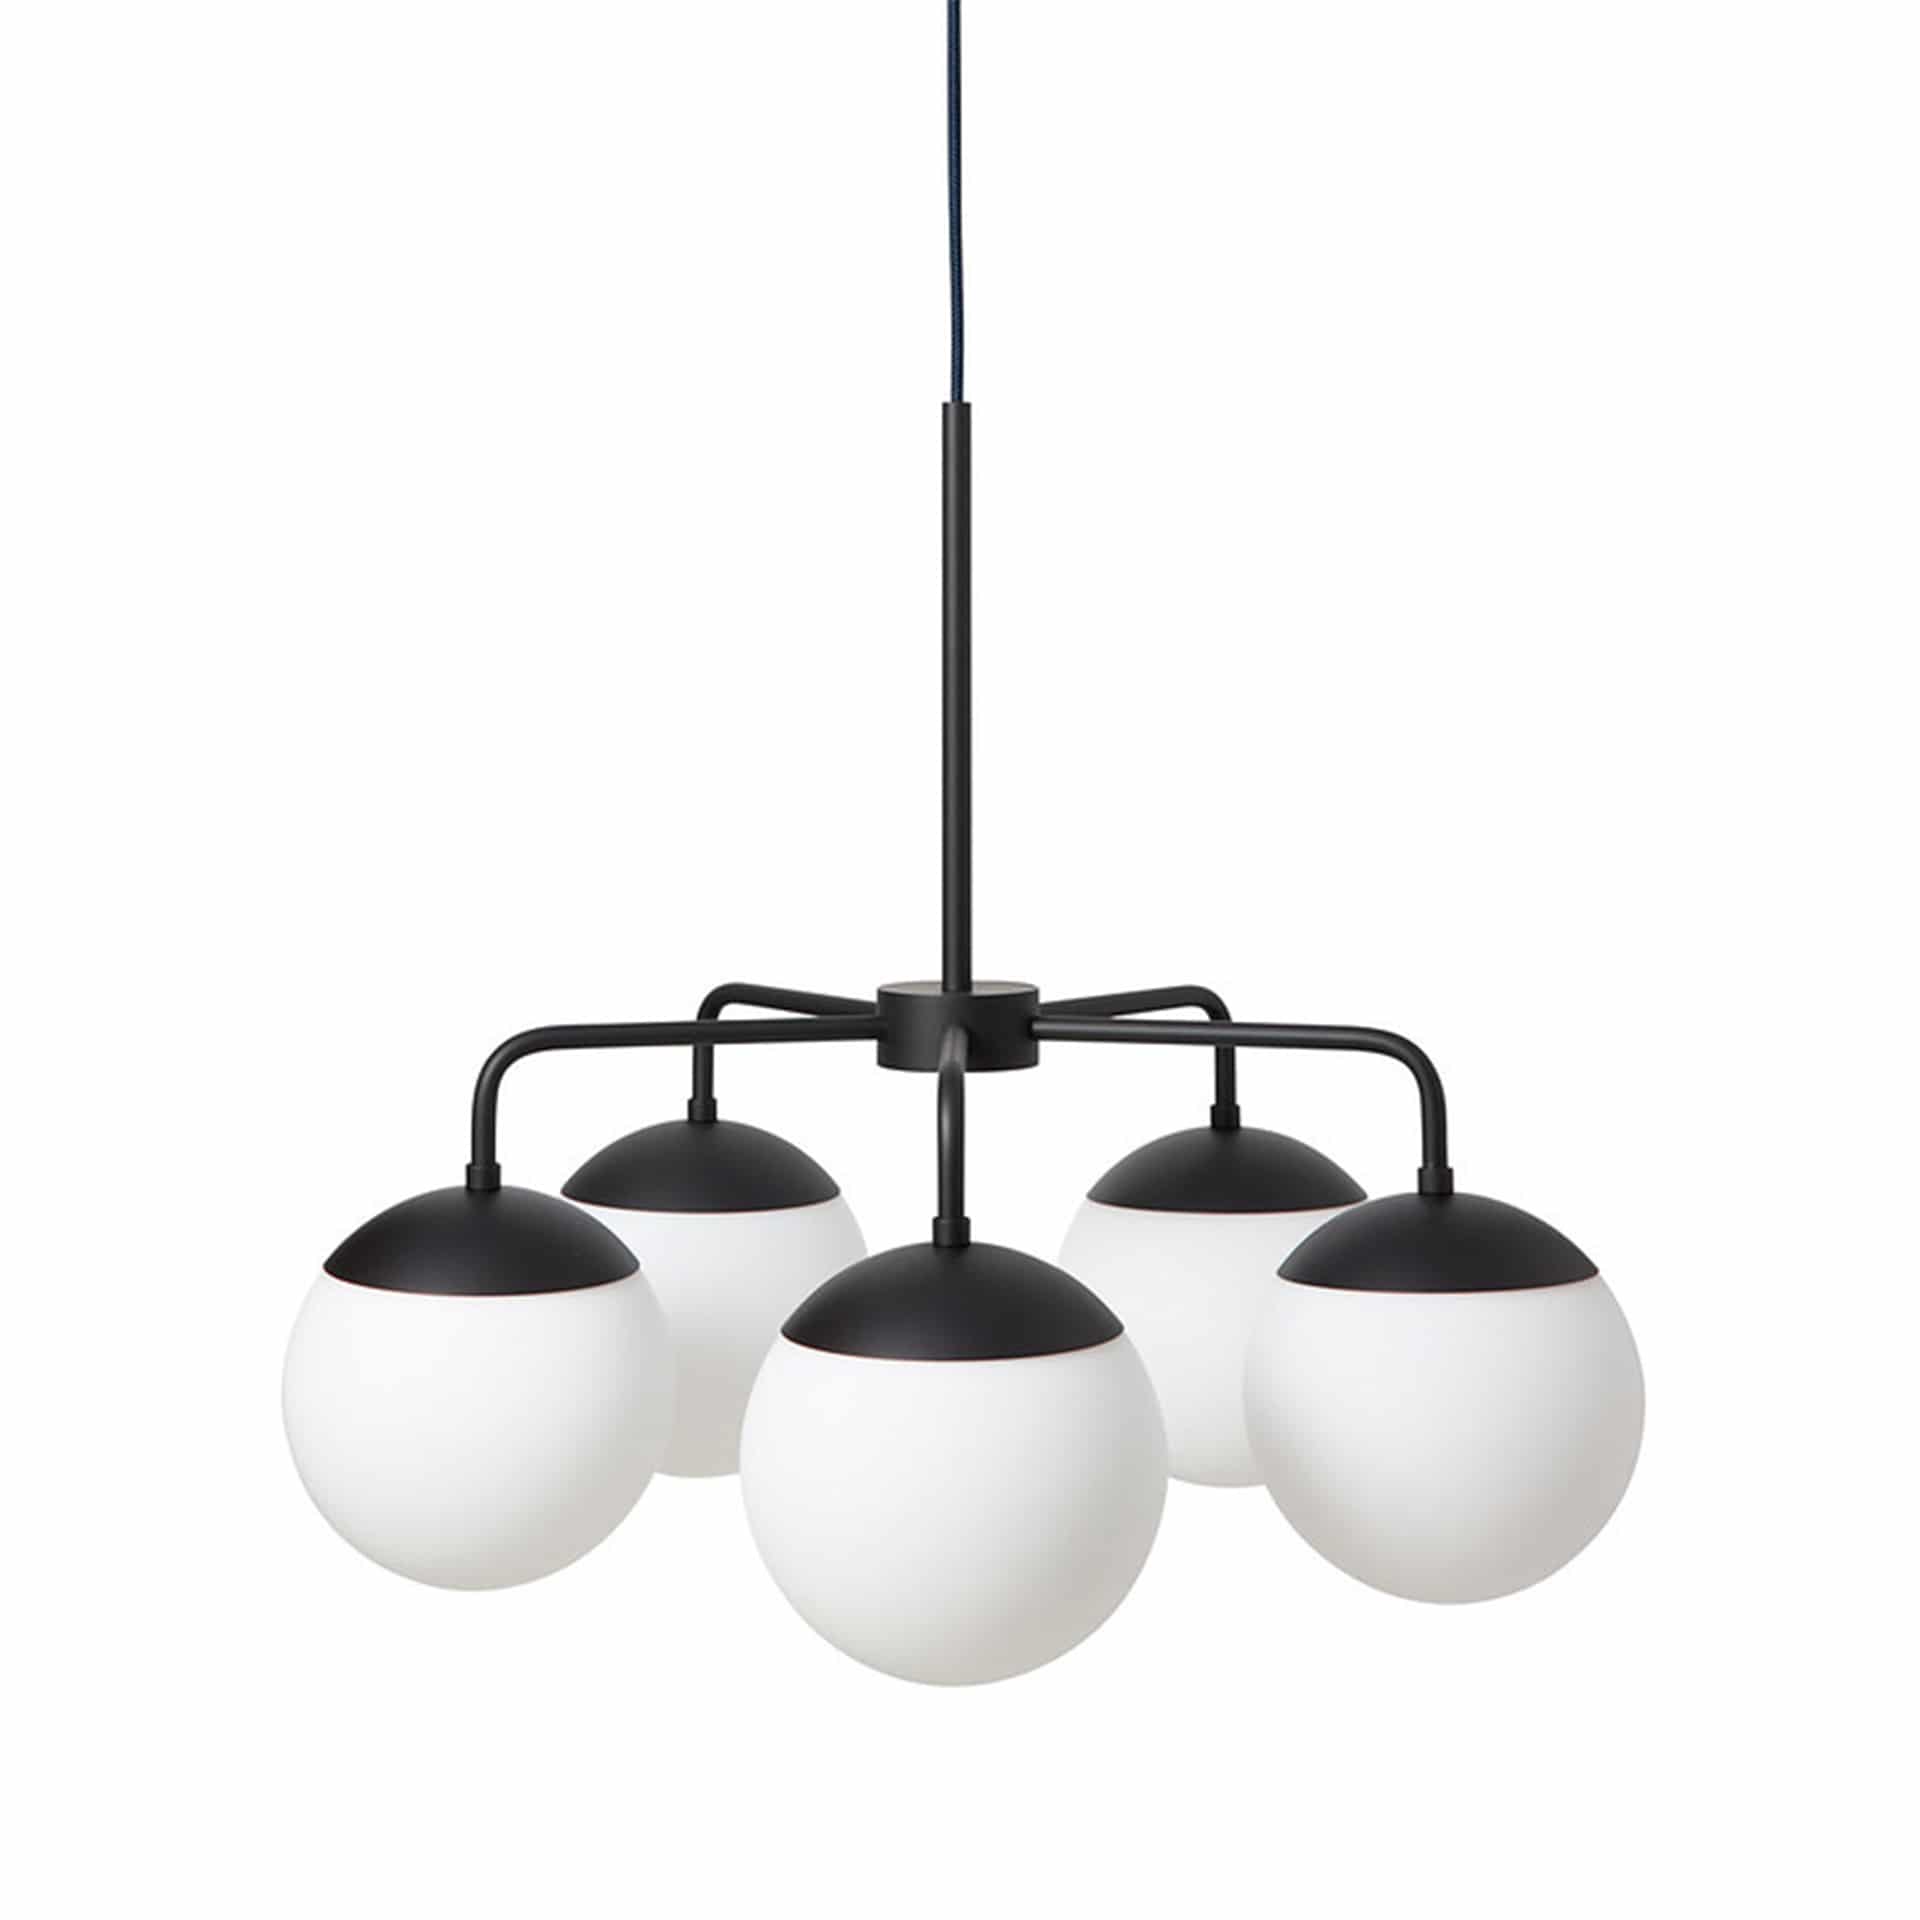 RUBN-pendant-lamp-lord-5-black-opal-glass-product-picture